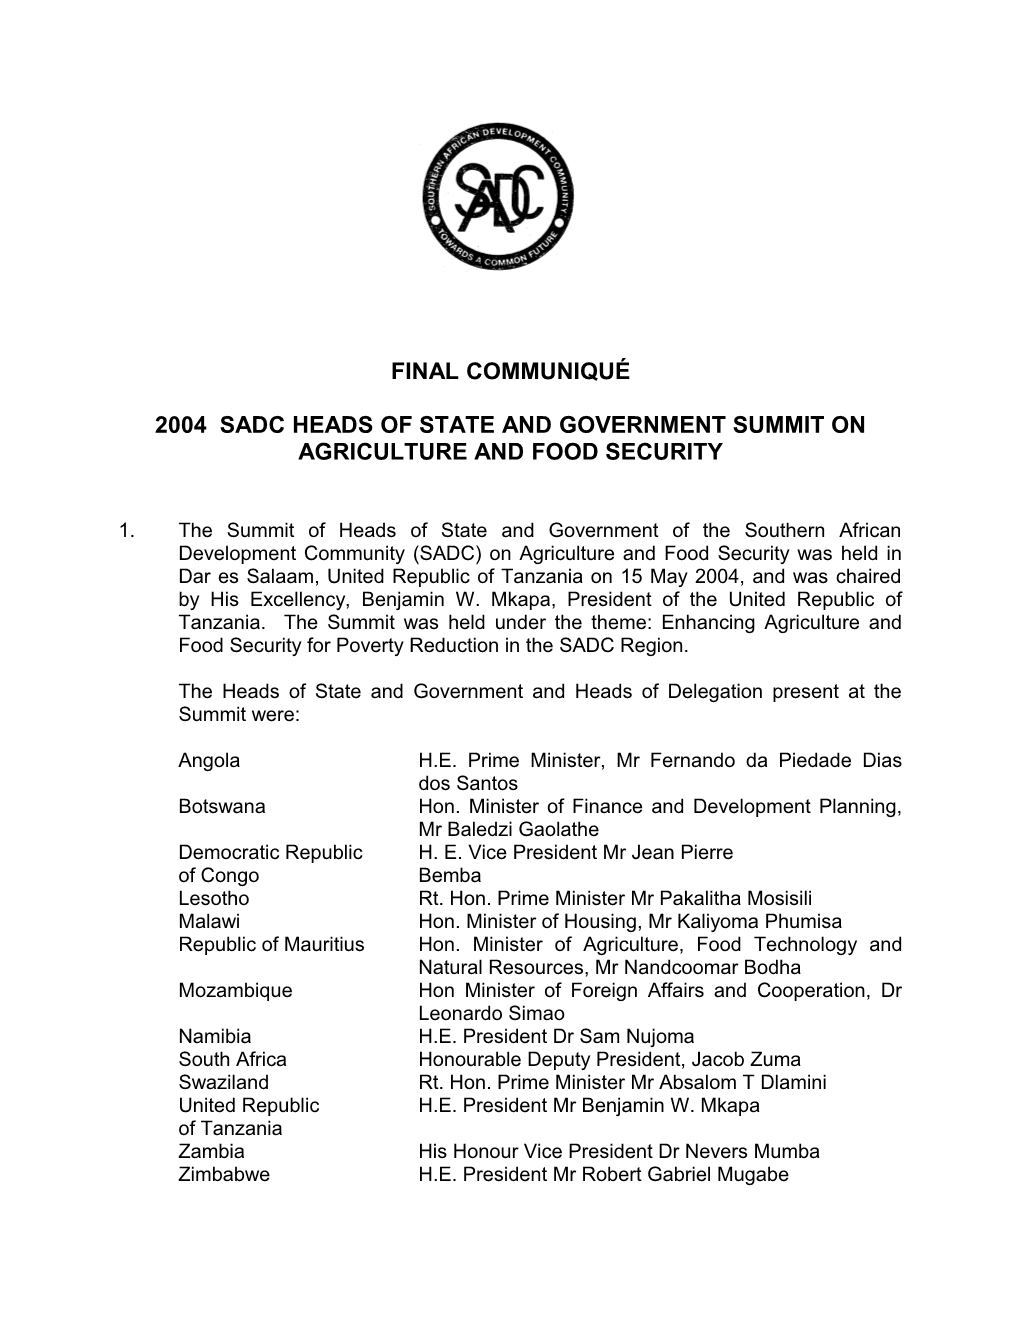 2004 Sadc Heads of State and Government Summit on Agriculture and Food Security